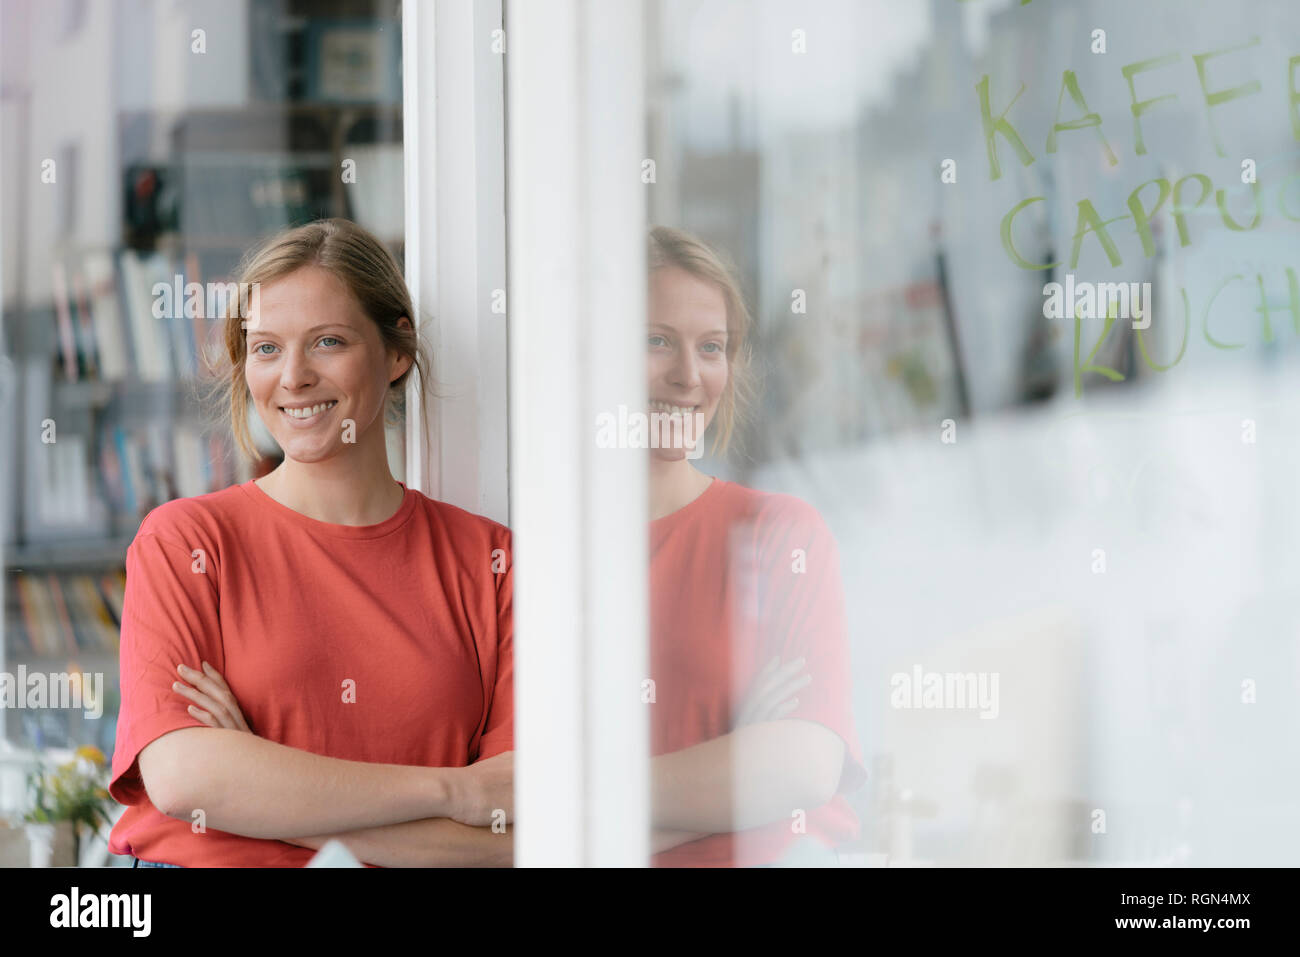 Portrait of smiling young woman at French door in a cafe Stock Photo